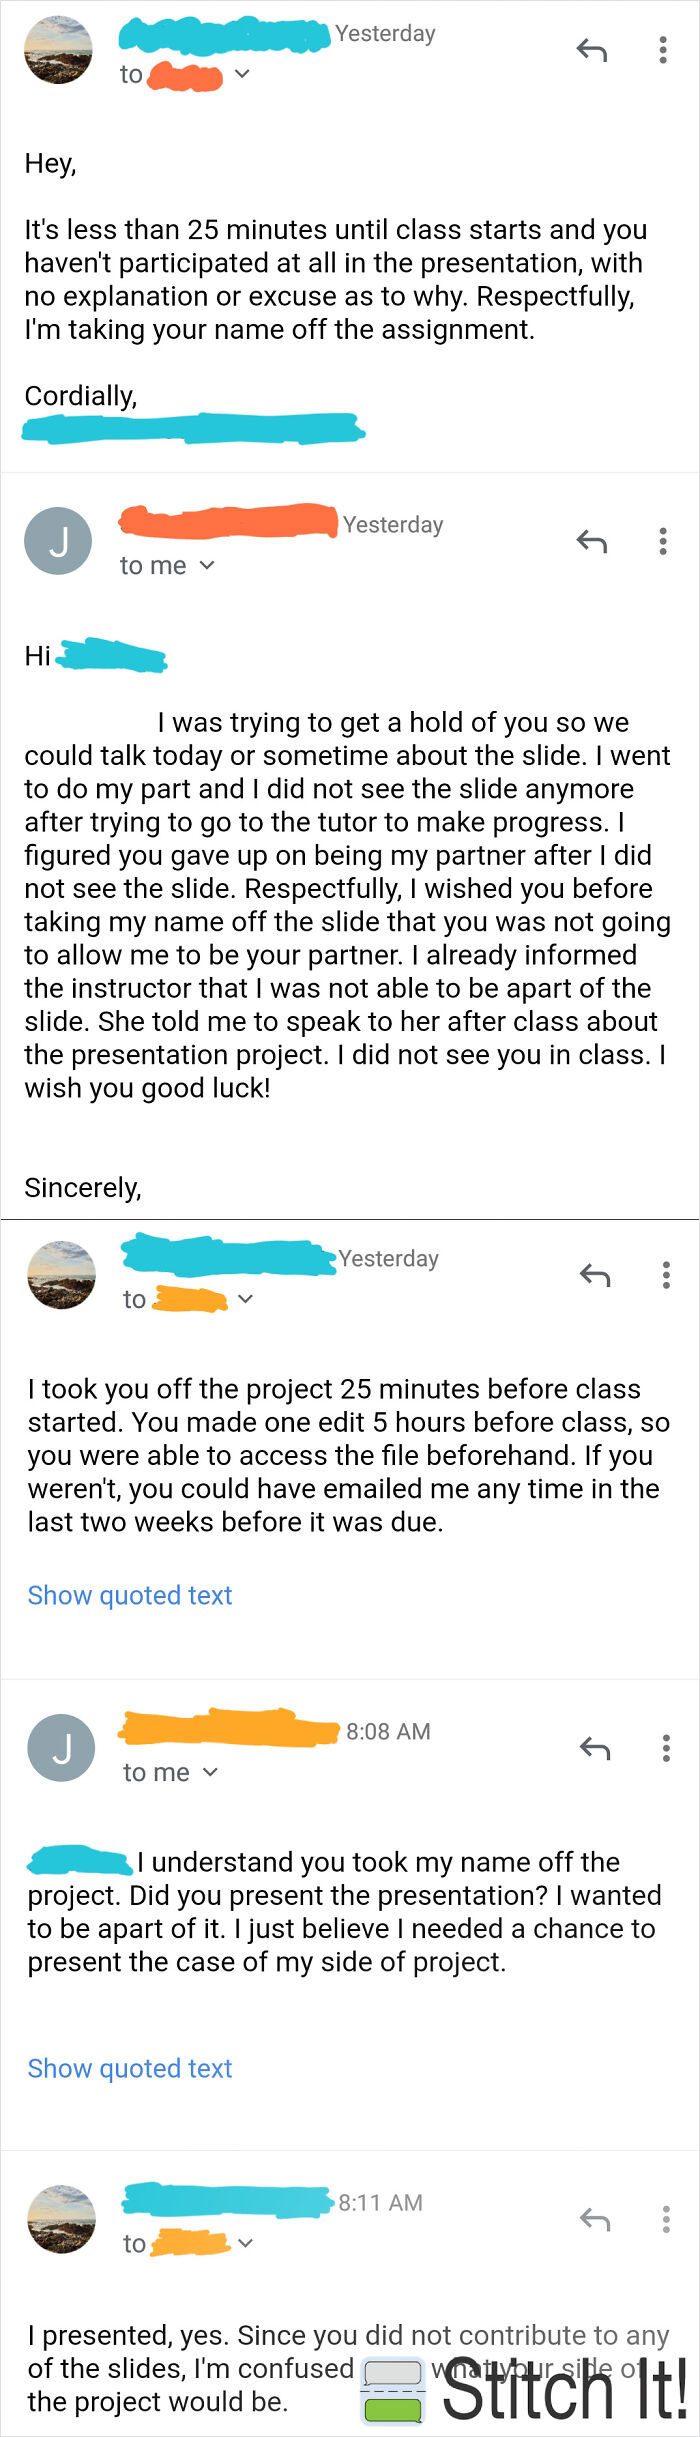 Gave This Dude Until 25 Minutes Before Class To Participate, Then Shut Him Out Of The Presentation